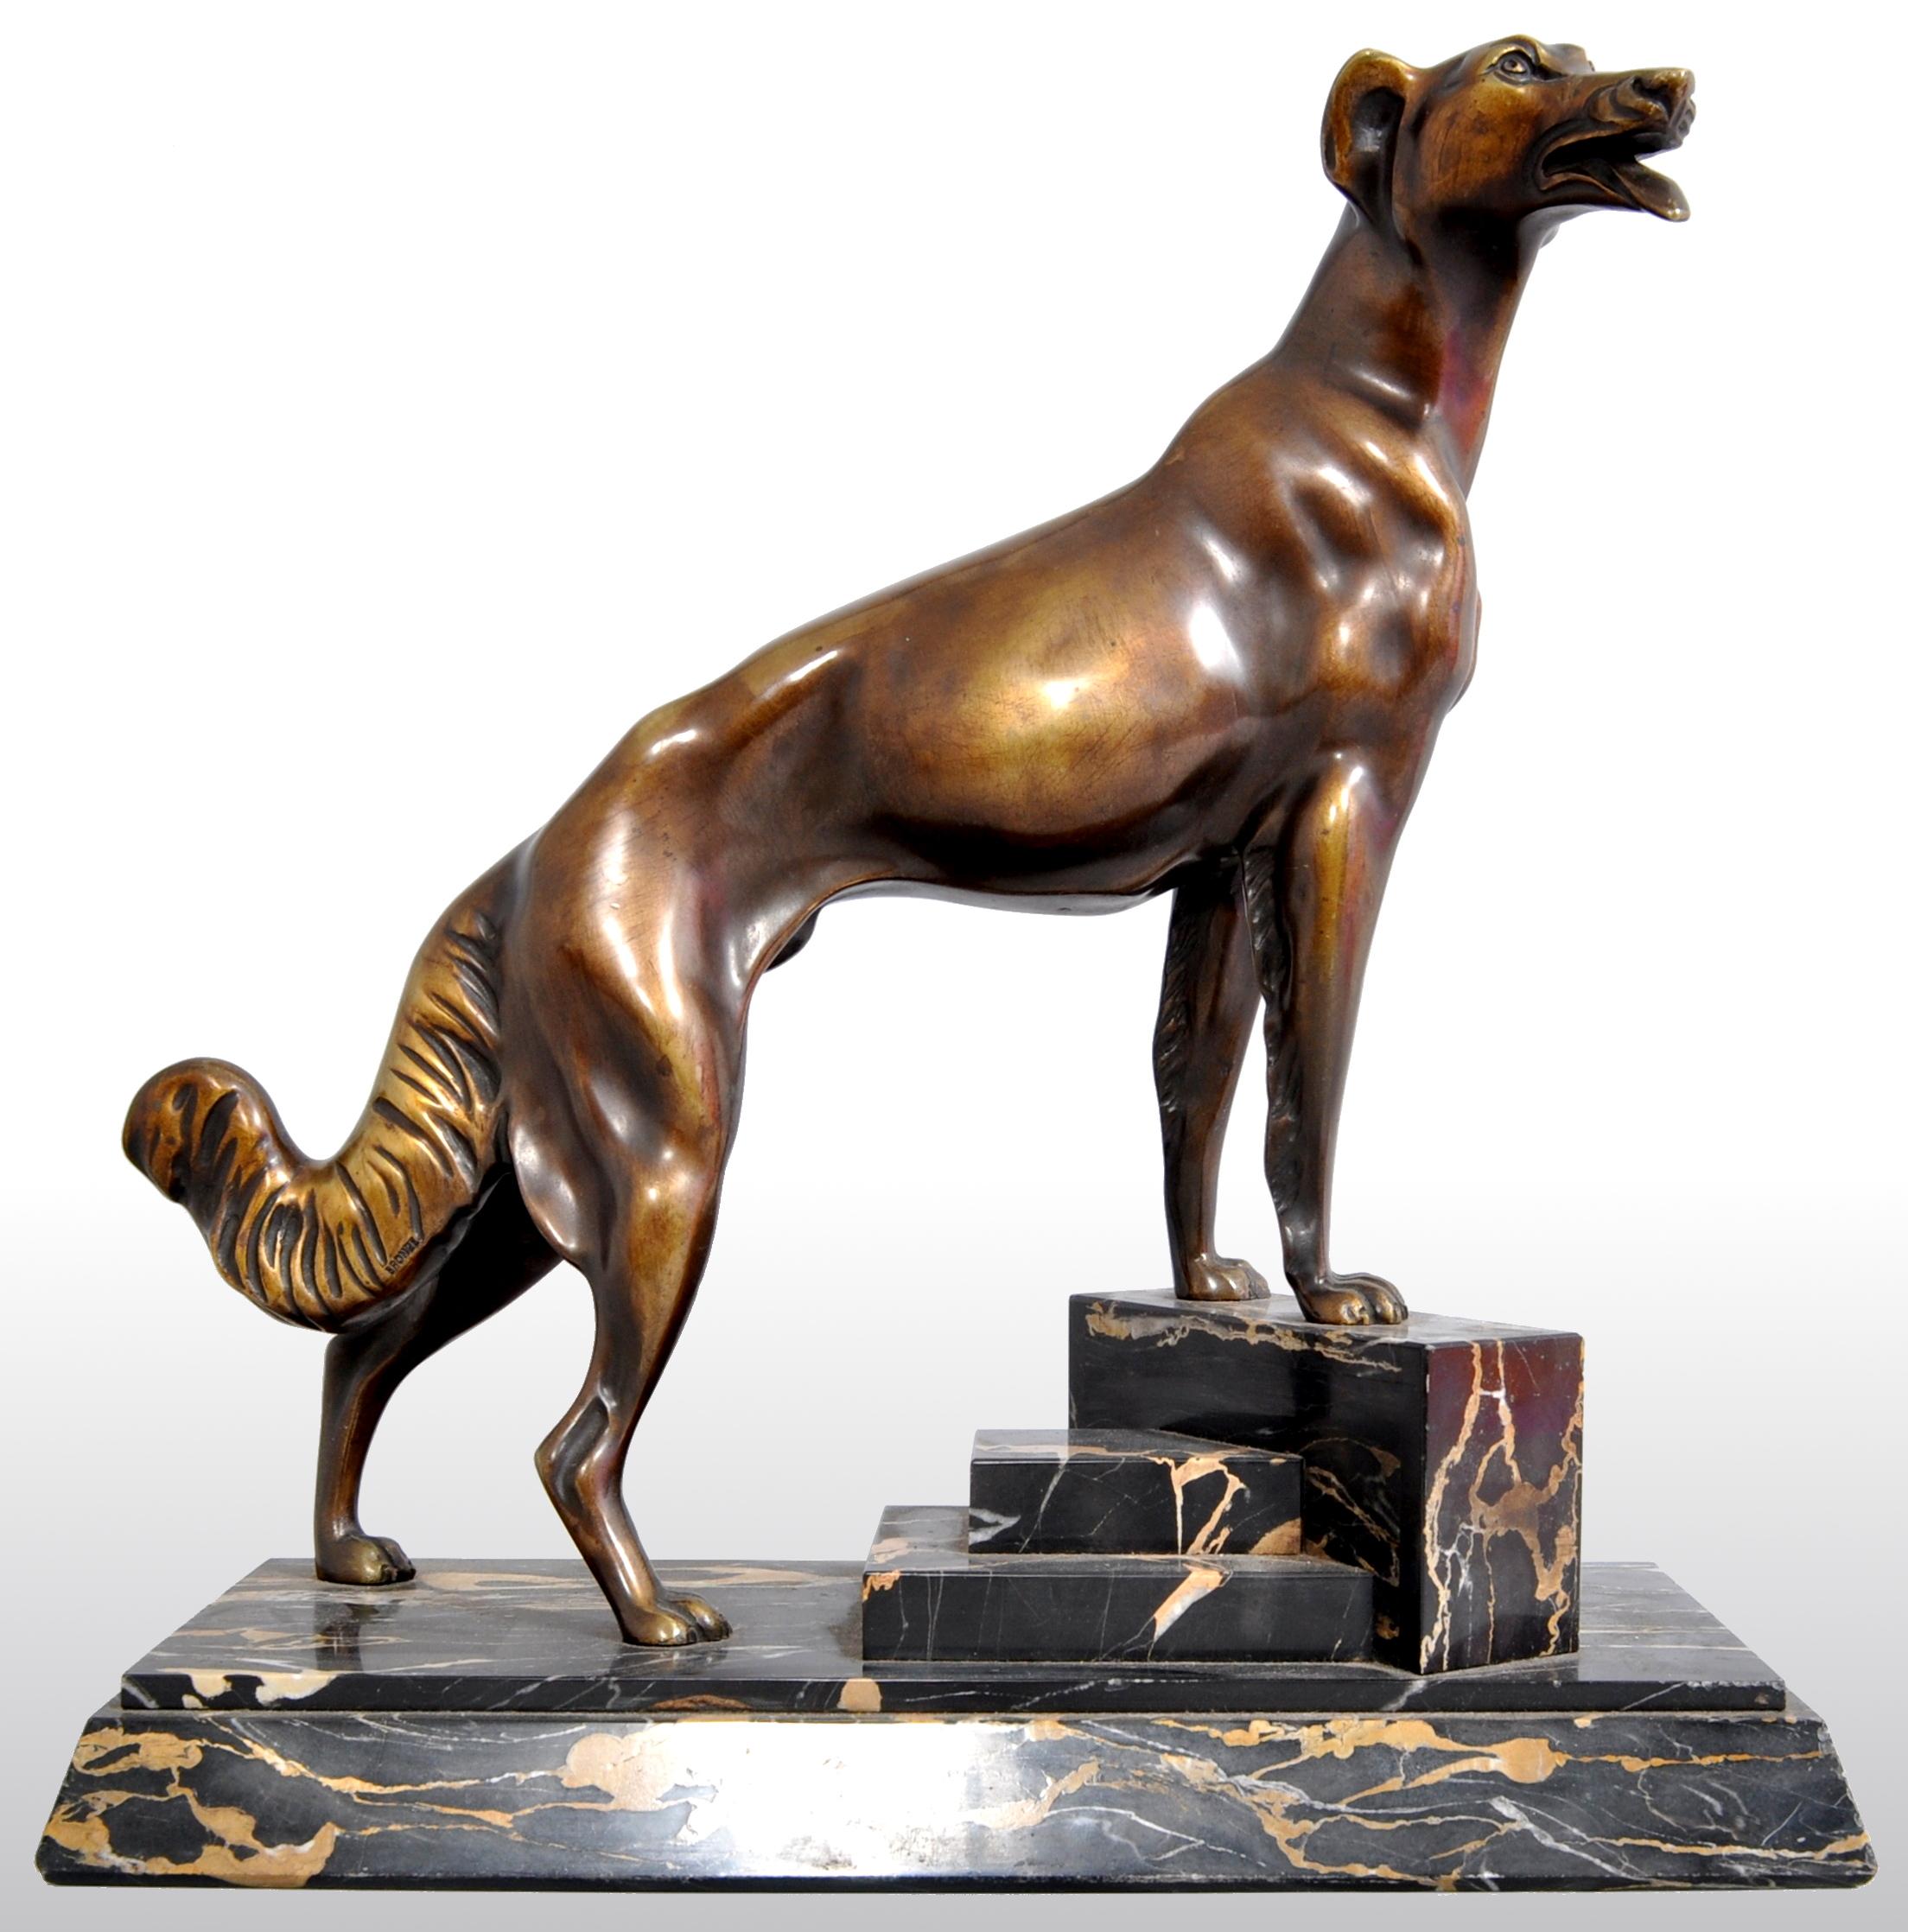 Antique Art Deco bronze Russian borzoi/wolfhound/dog by Louis-Albert Carvin (1875-1951). The bronze depicting a very handsome Russian Wolfhound (Borzoi), standing proudly on a stepped, veined plinth. The bronze signed on the plinth 